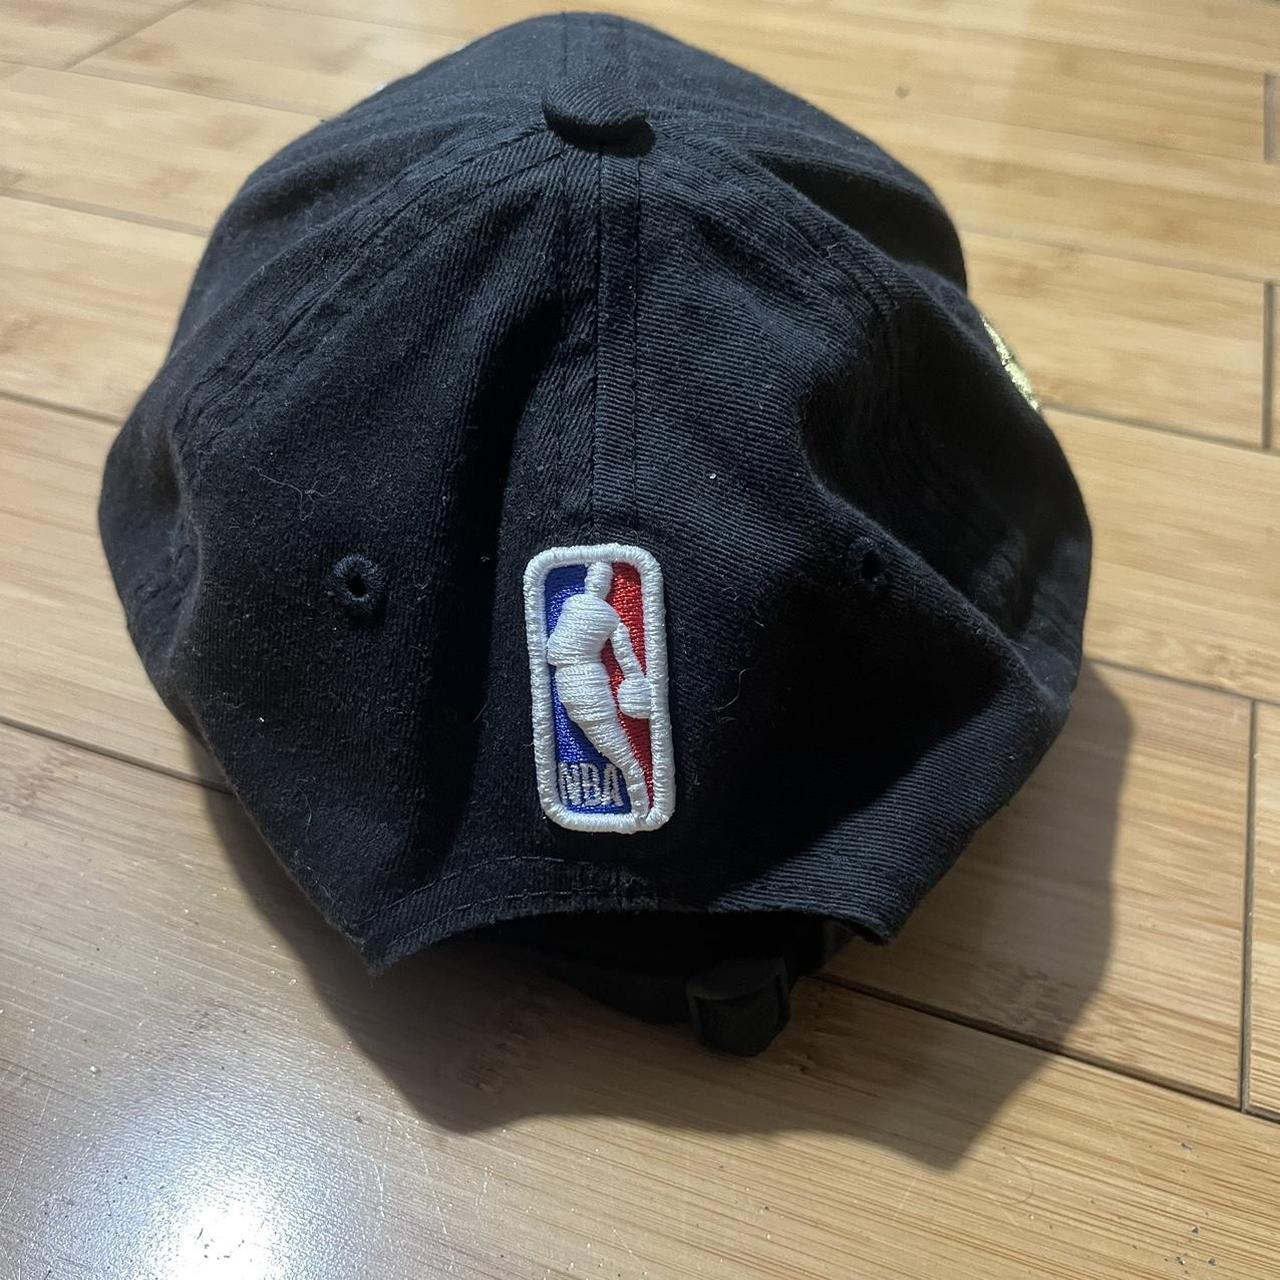 LAKERS 2020 CHAMPIONSHIP HAT One size Worn only a - Depop